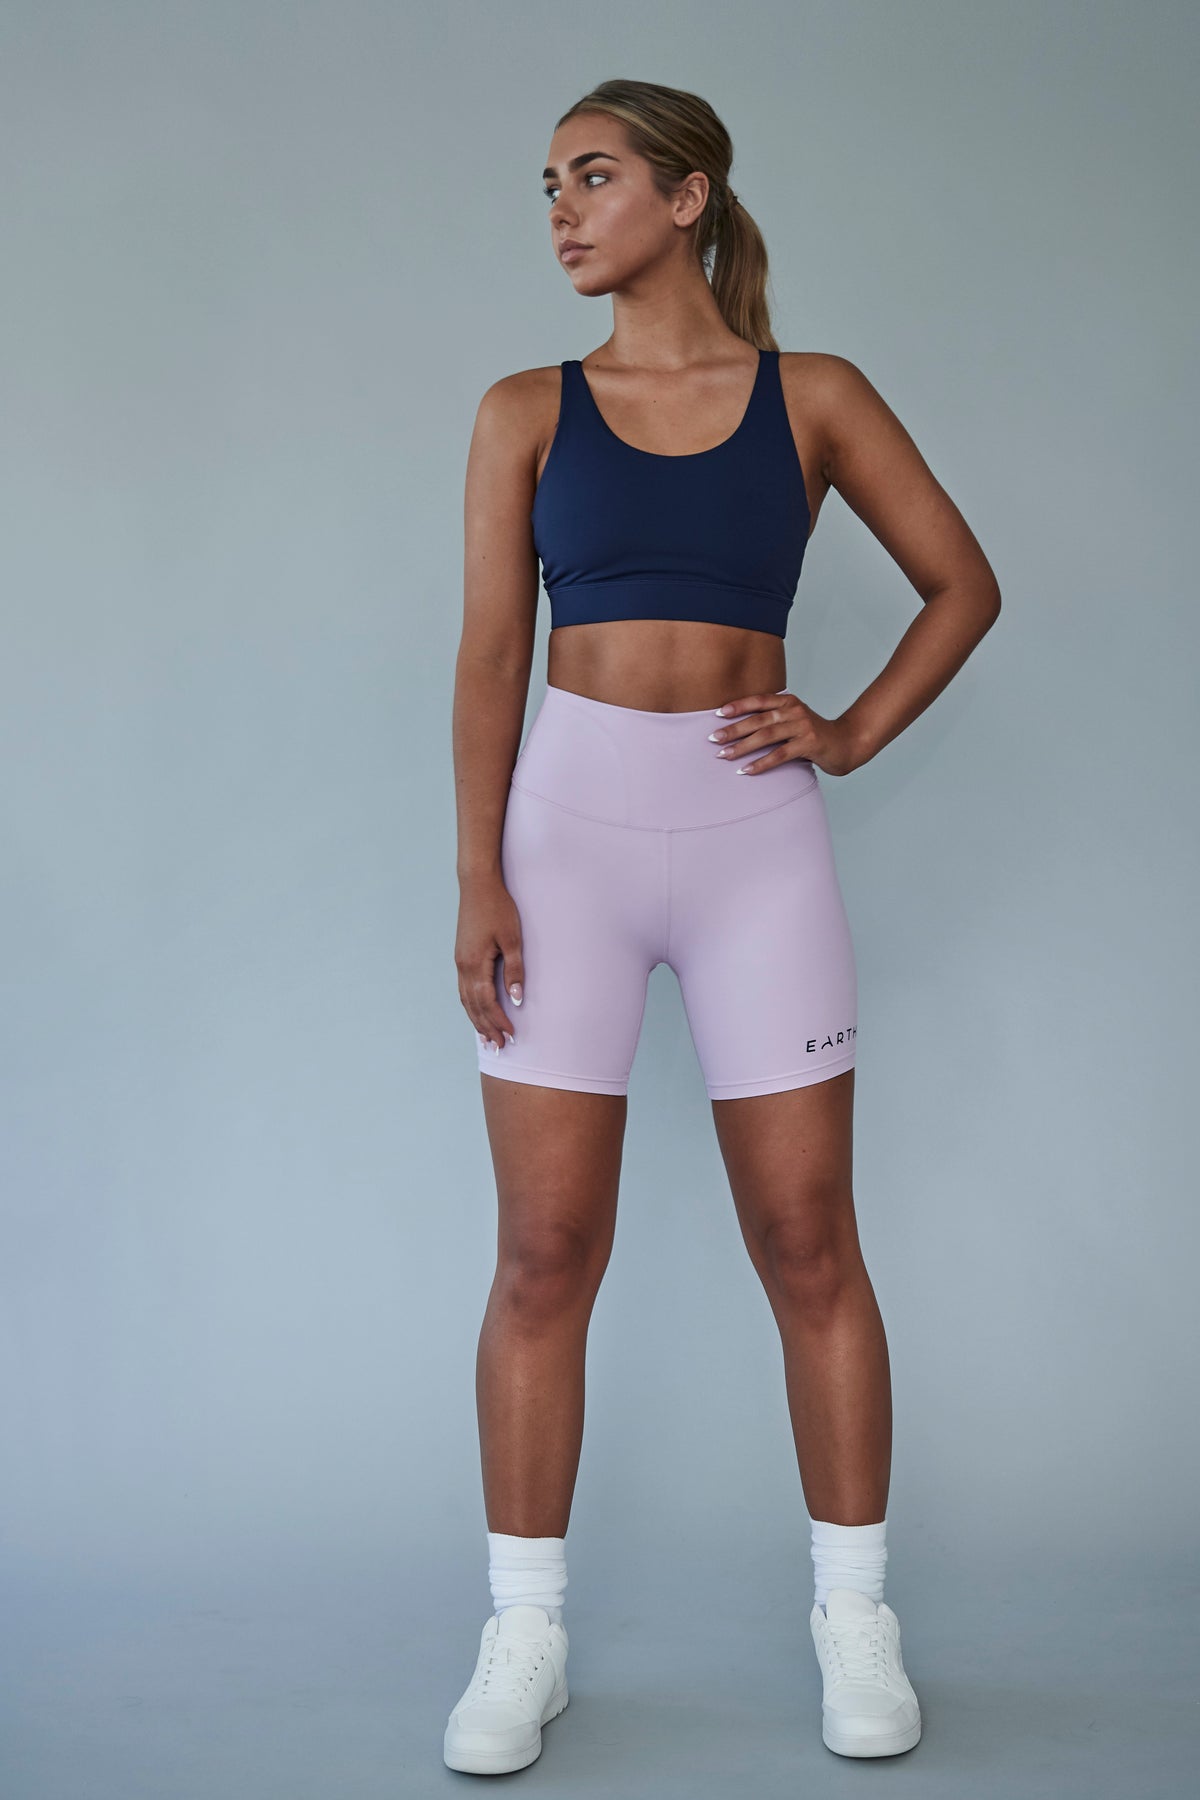 An Earthletica model wearing the Into The Blue crop and Lilac Dreaming bike shorts. She is turned to the right, gazing into the distance with a hand on her hip.